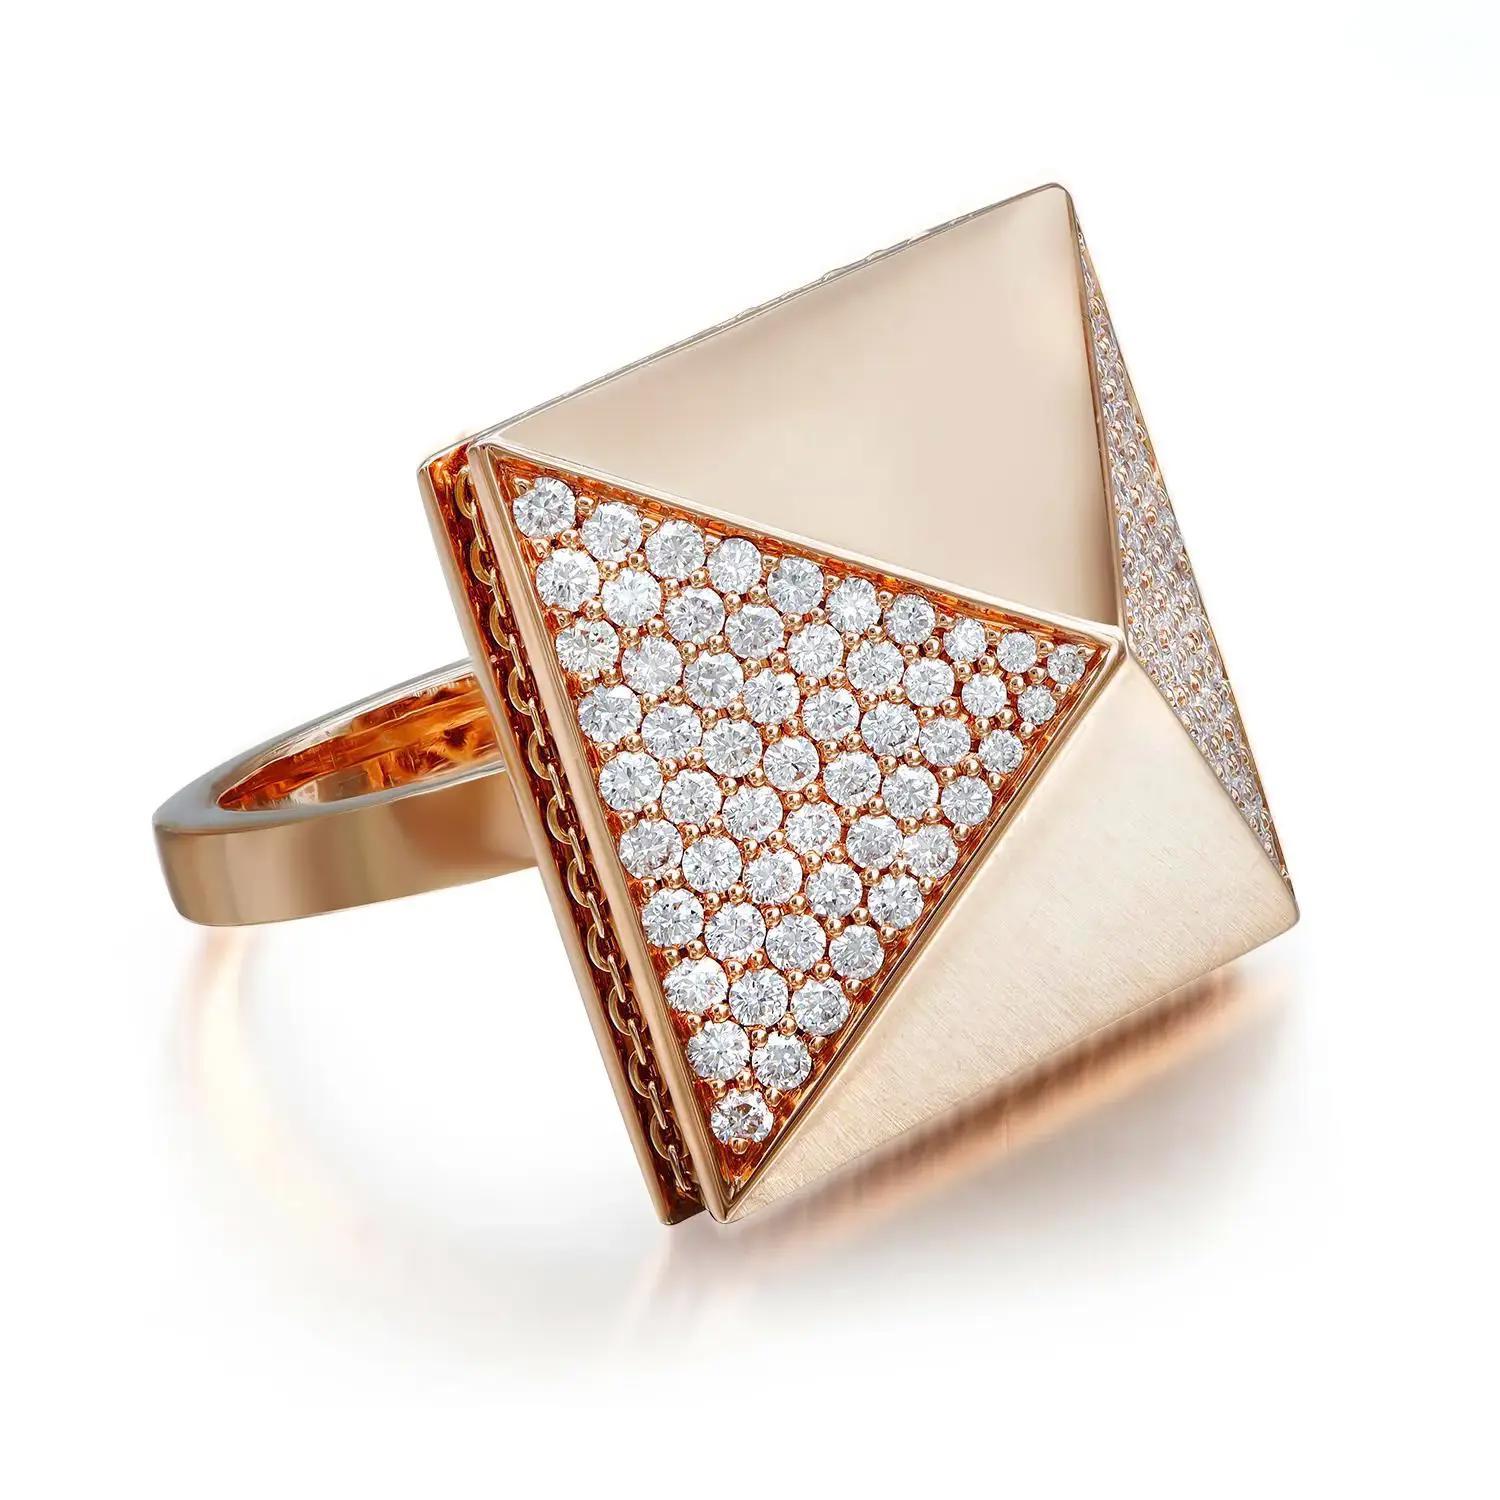 Modern Messika 1.11Cttw Spiky Diamond Cocktail Ring 18K Rose Gold Size 53 US 6.5 For Sale